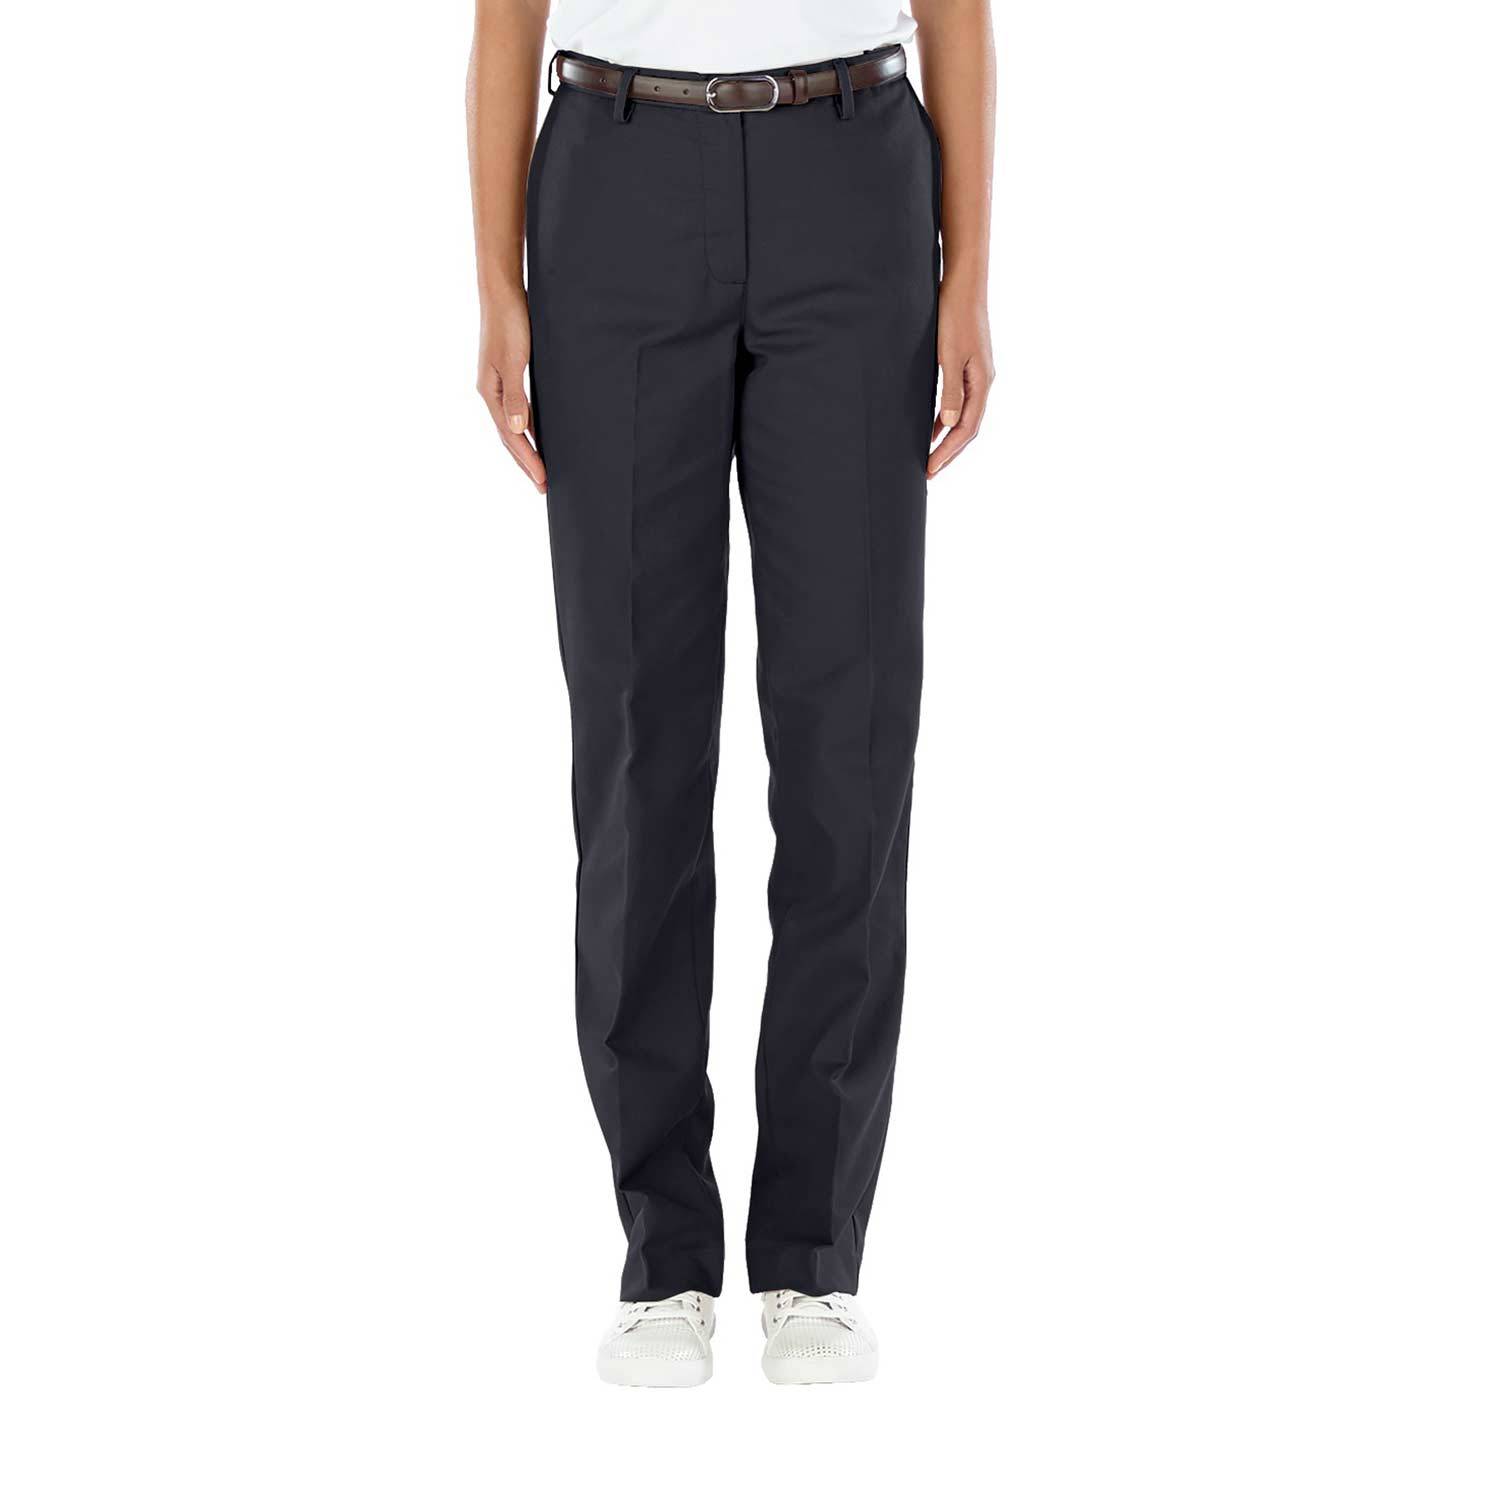 EDWARDS LADIES EASY FIT CHINO FLAT FRONT PANT